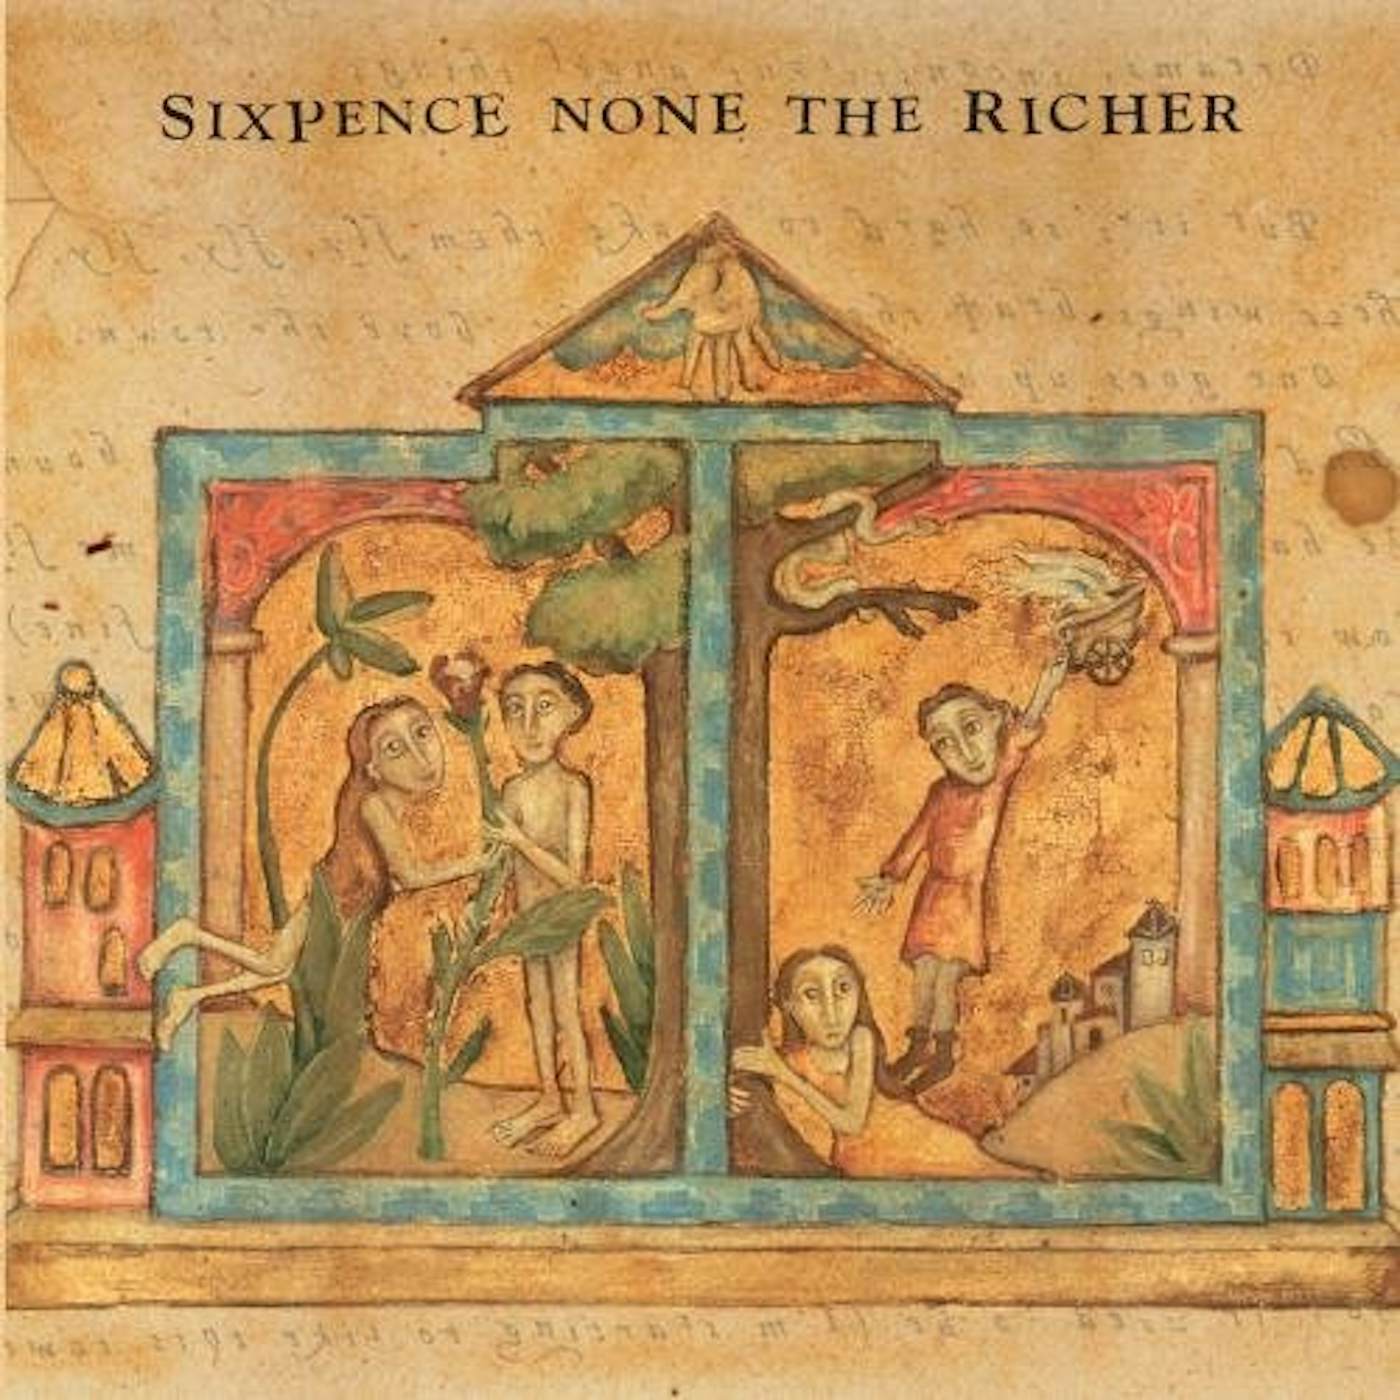 SIXPENCE NONE THE RICHER CD